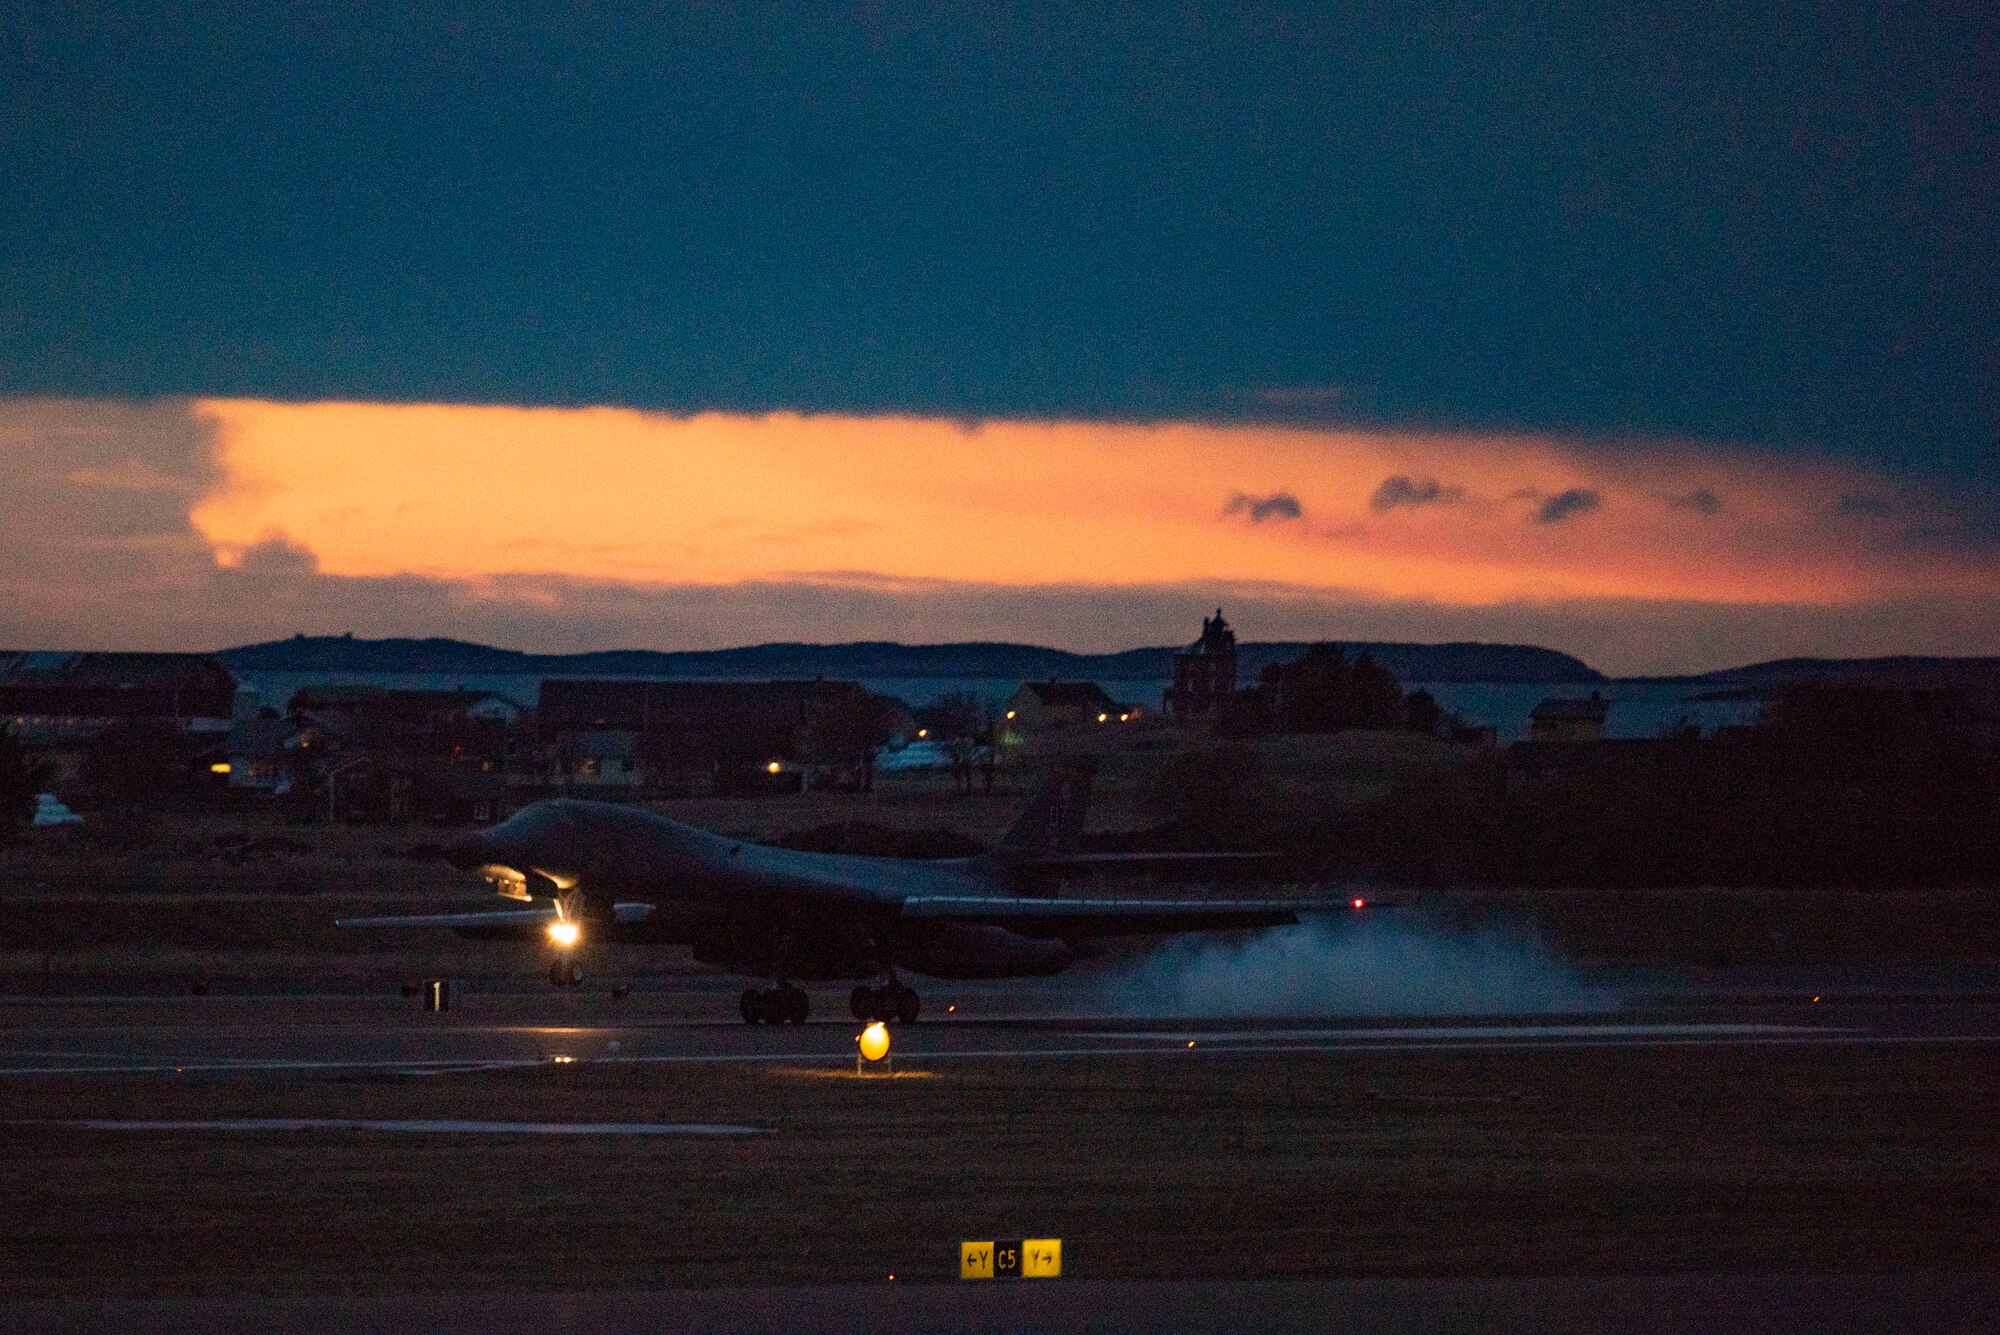 A B-1B Lancer assigned to the 9th Expeditionary Bomb Squadron lands at Ørland Air Force Station, Norway, March 12, 2021. The B-1 integrated with ally and partner fighter aircraft and Joint Terminal Attack Controllers during a Bomber Task Force Europe training mission, Spring Spear. (U.S. Air Force photo by Airman 1st Class Colin Hollowell)